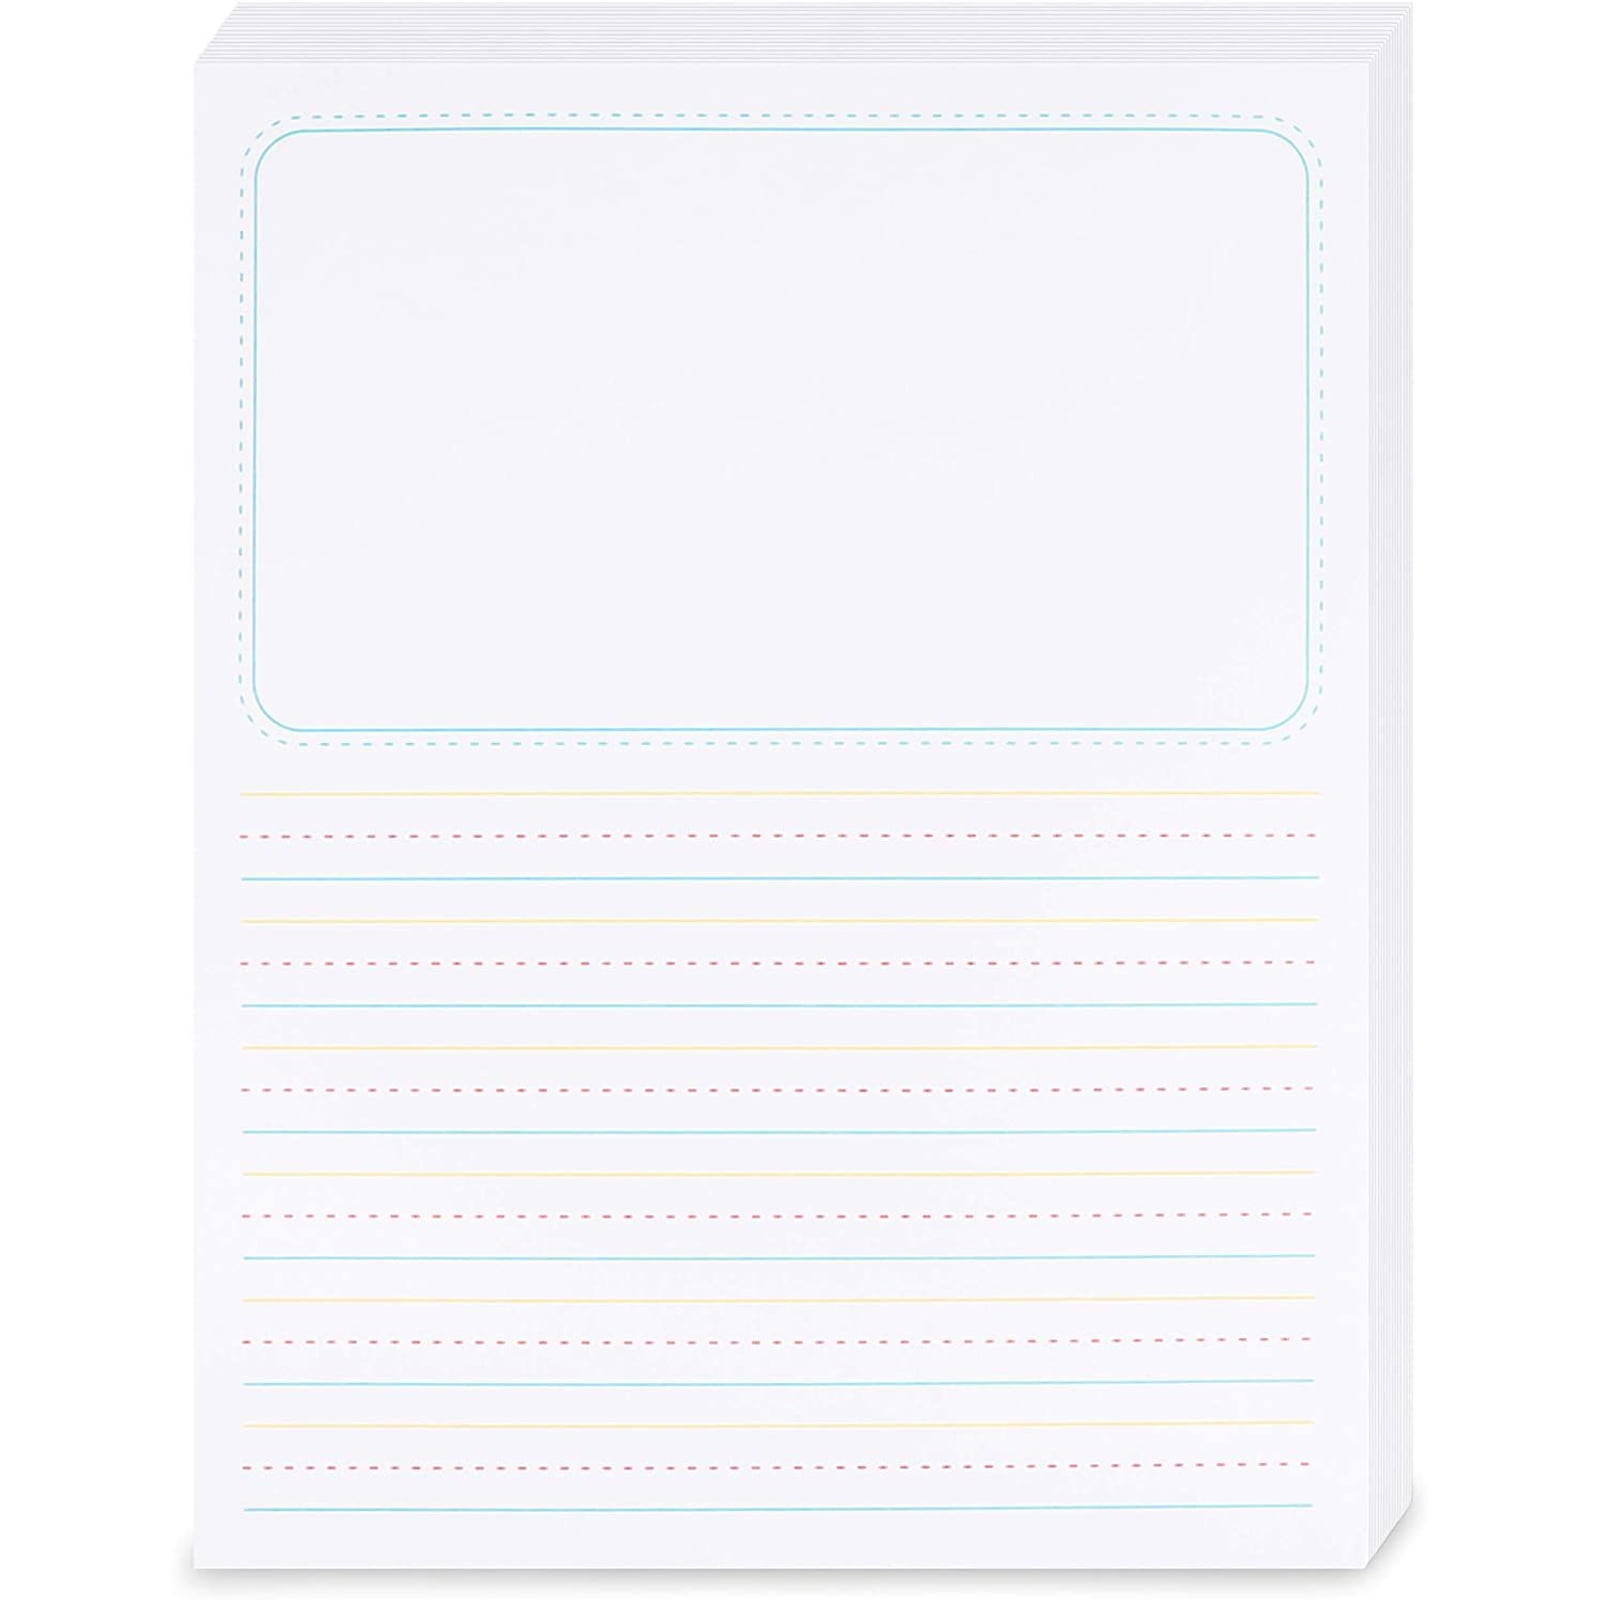 Kindergarten Writing Paper with Dotted Lines for Kids: 150 Pages